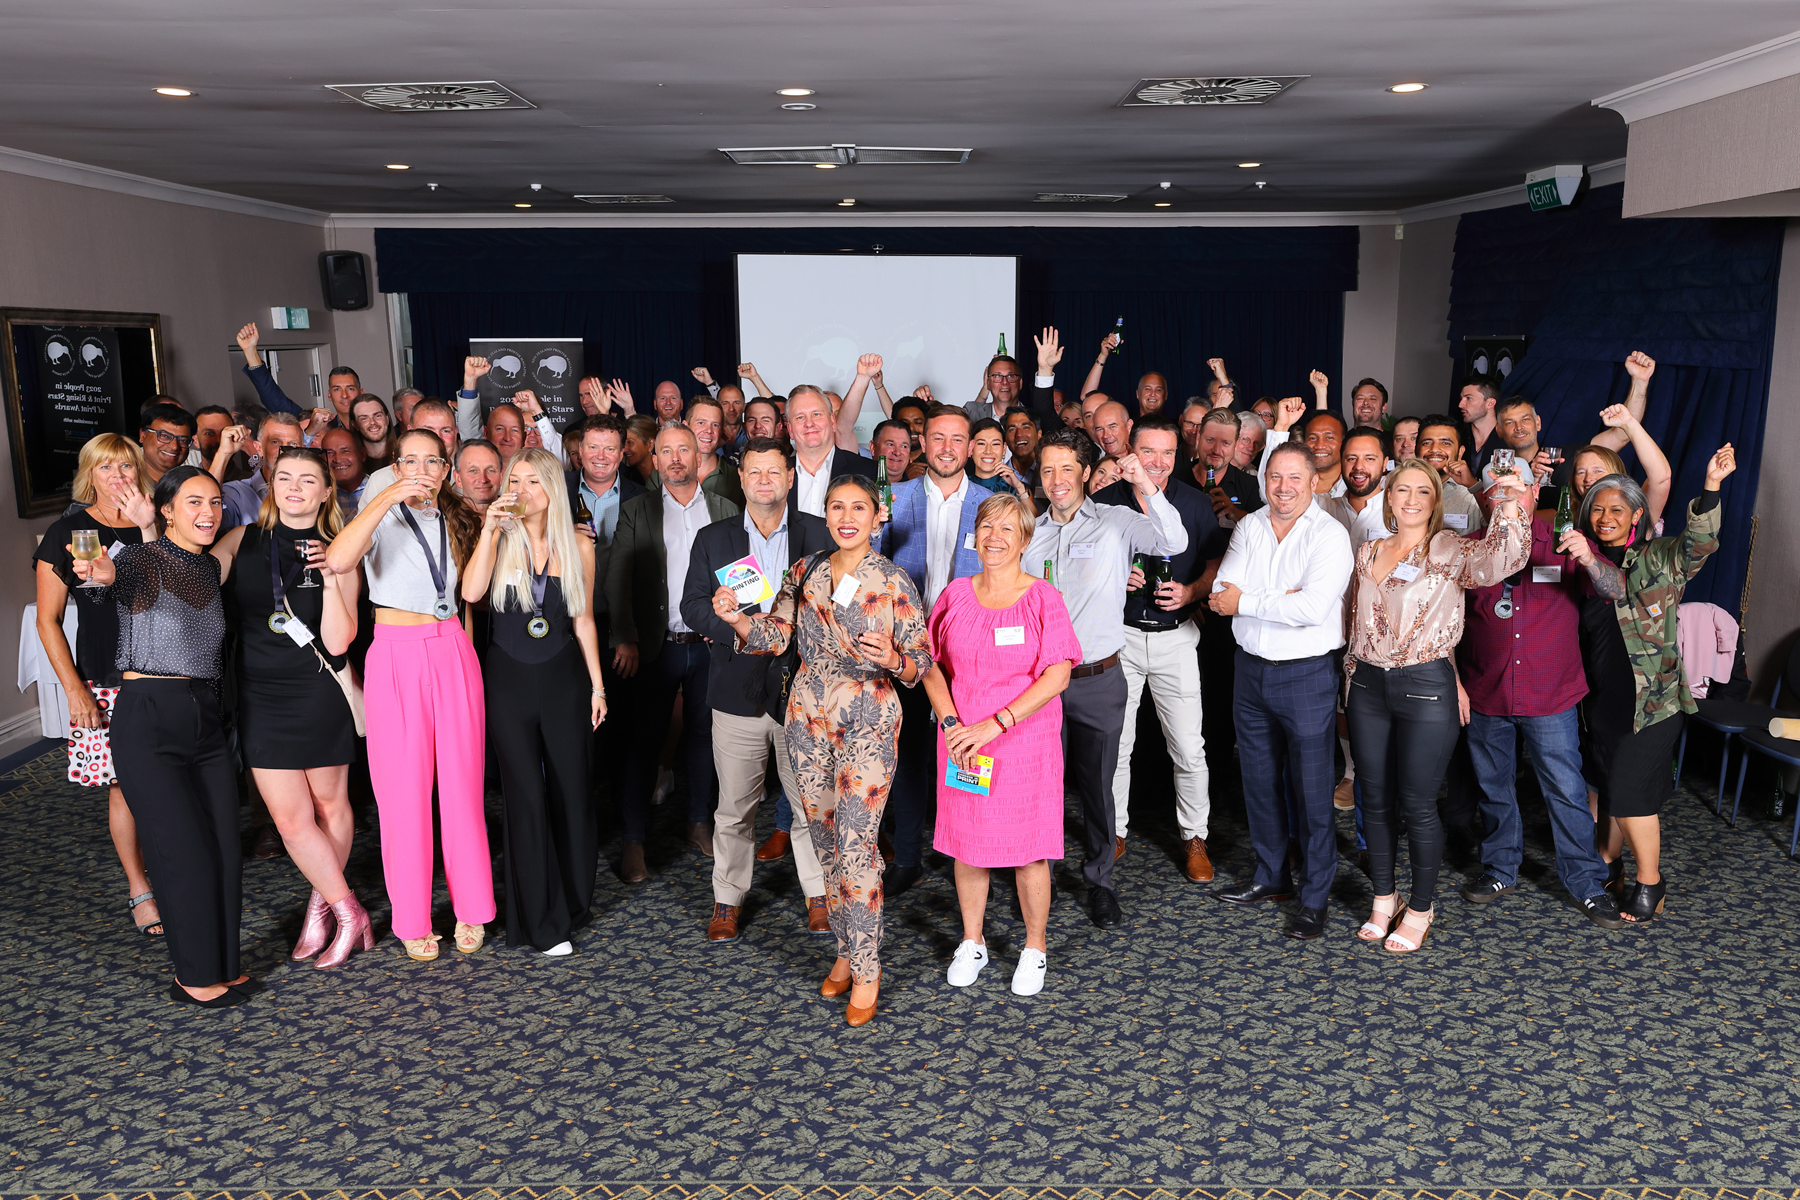 Over 100 print industry professionals came together to celebrate the printing industry talent during the 2023 People in Print Awards and Rising Star Awards event in Auckland